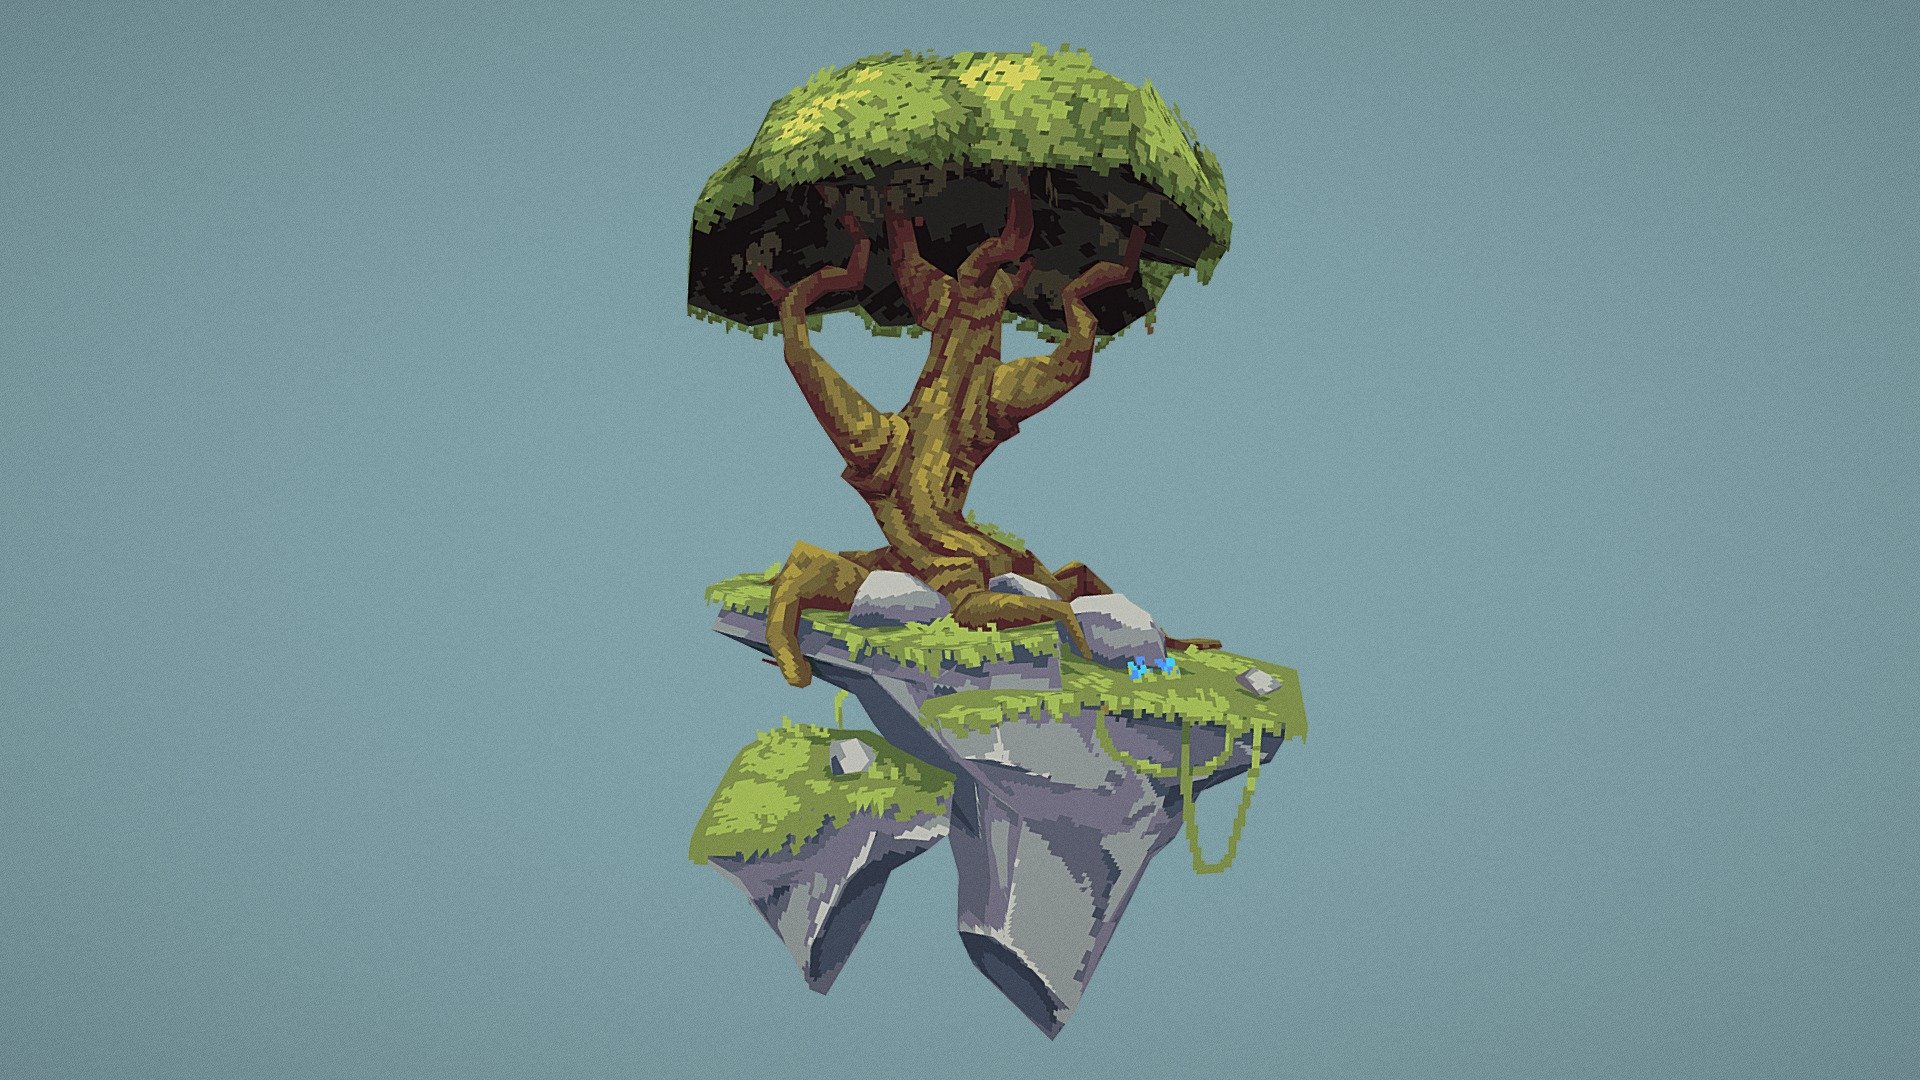 An experiment where I try making more of an organic piece and practice working with flat lighting. This was modeled using blender for more flexible mesh editing. Painted using Blockbench - Tiny Floating Island - 3D model by Wacky (@wackyblocks) 3d model